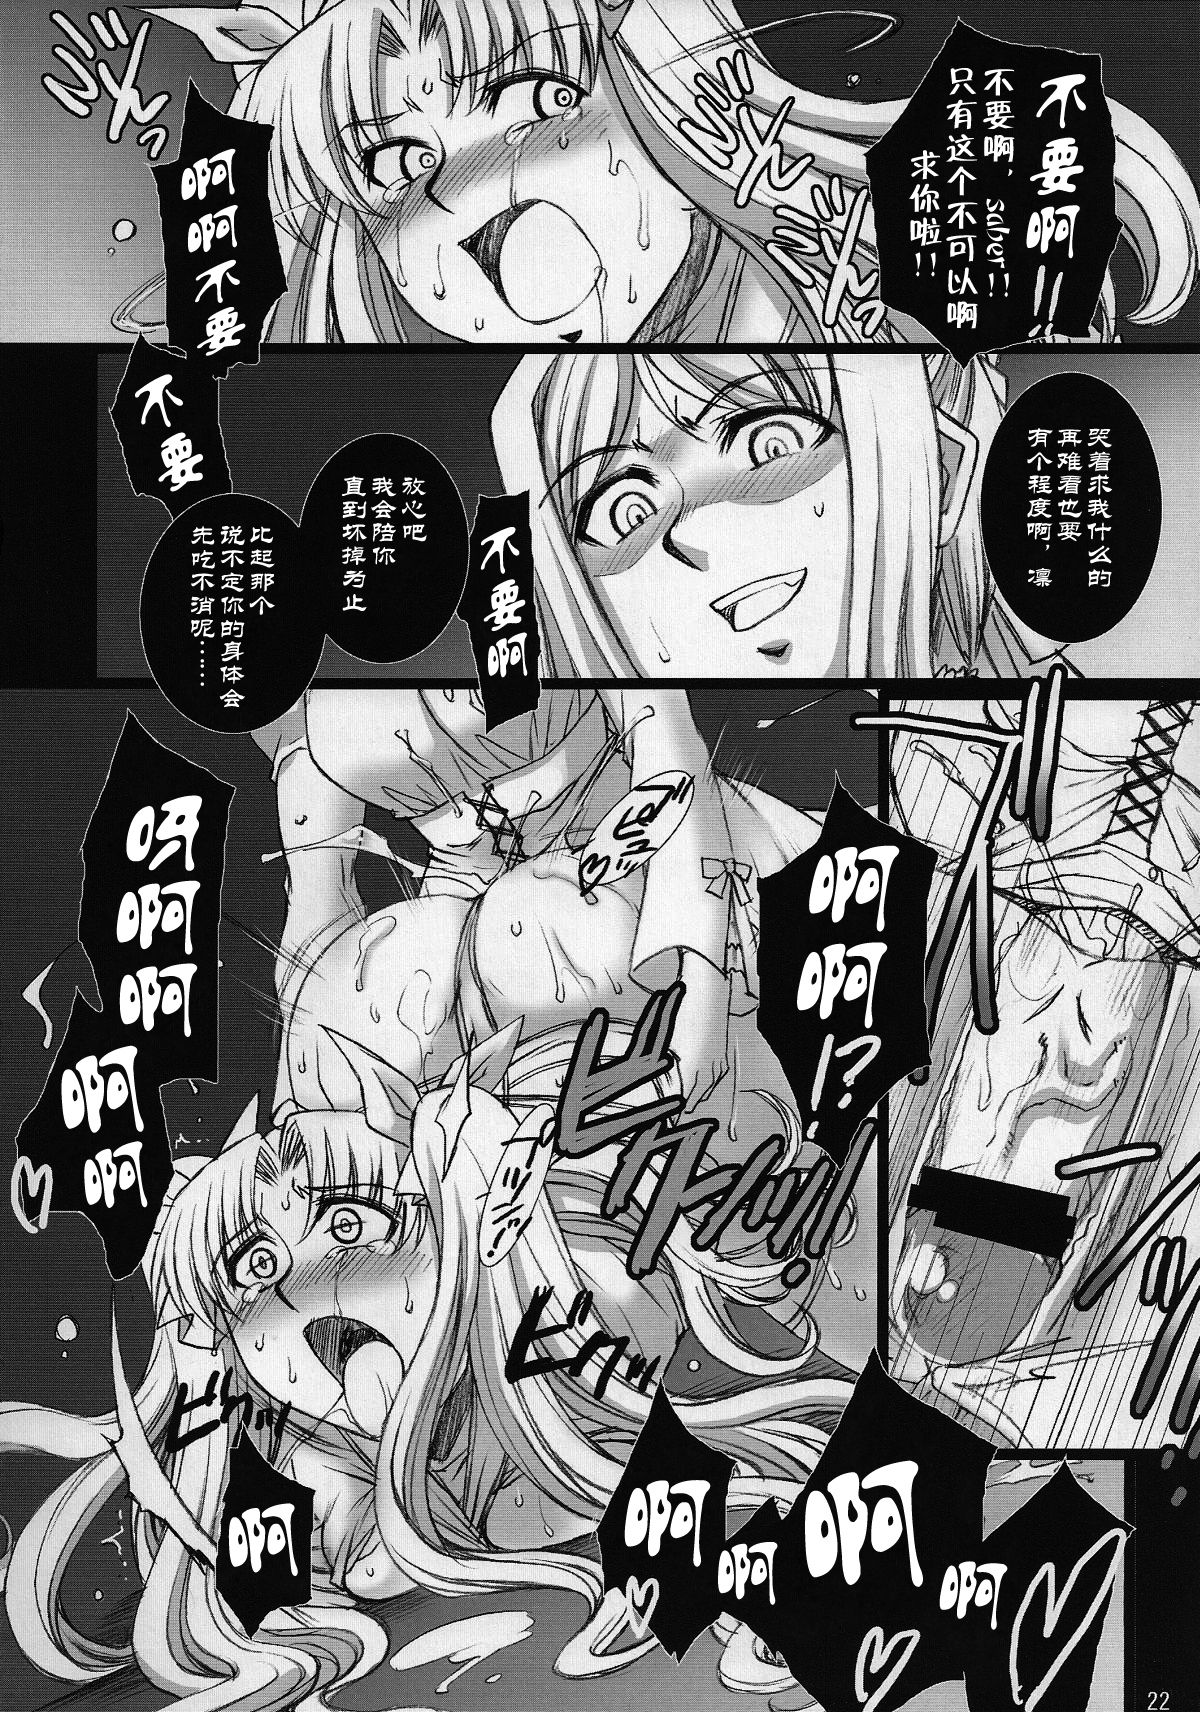 (COMIC1☆2) [H.B (B-RIVER)] Red Degeneration -DAY/3- (Fate/stay night) [Chinese] [不咕鸟汉化组] page 21 full